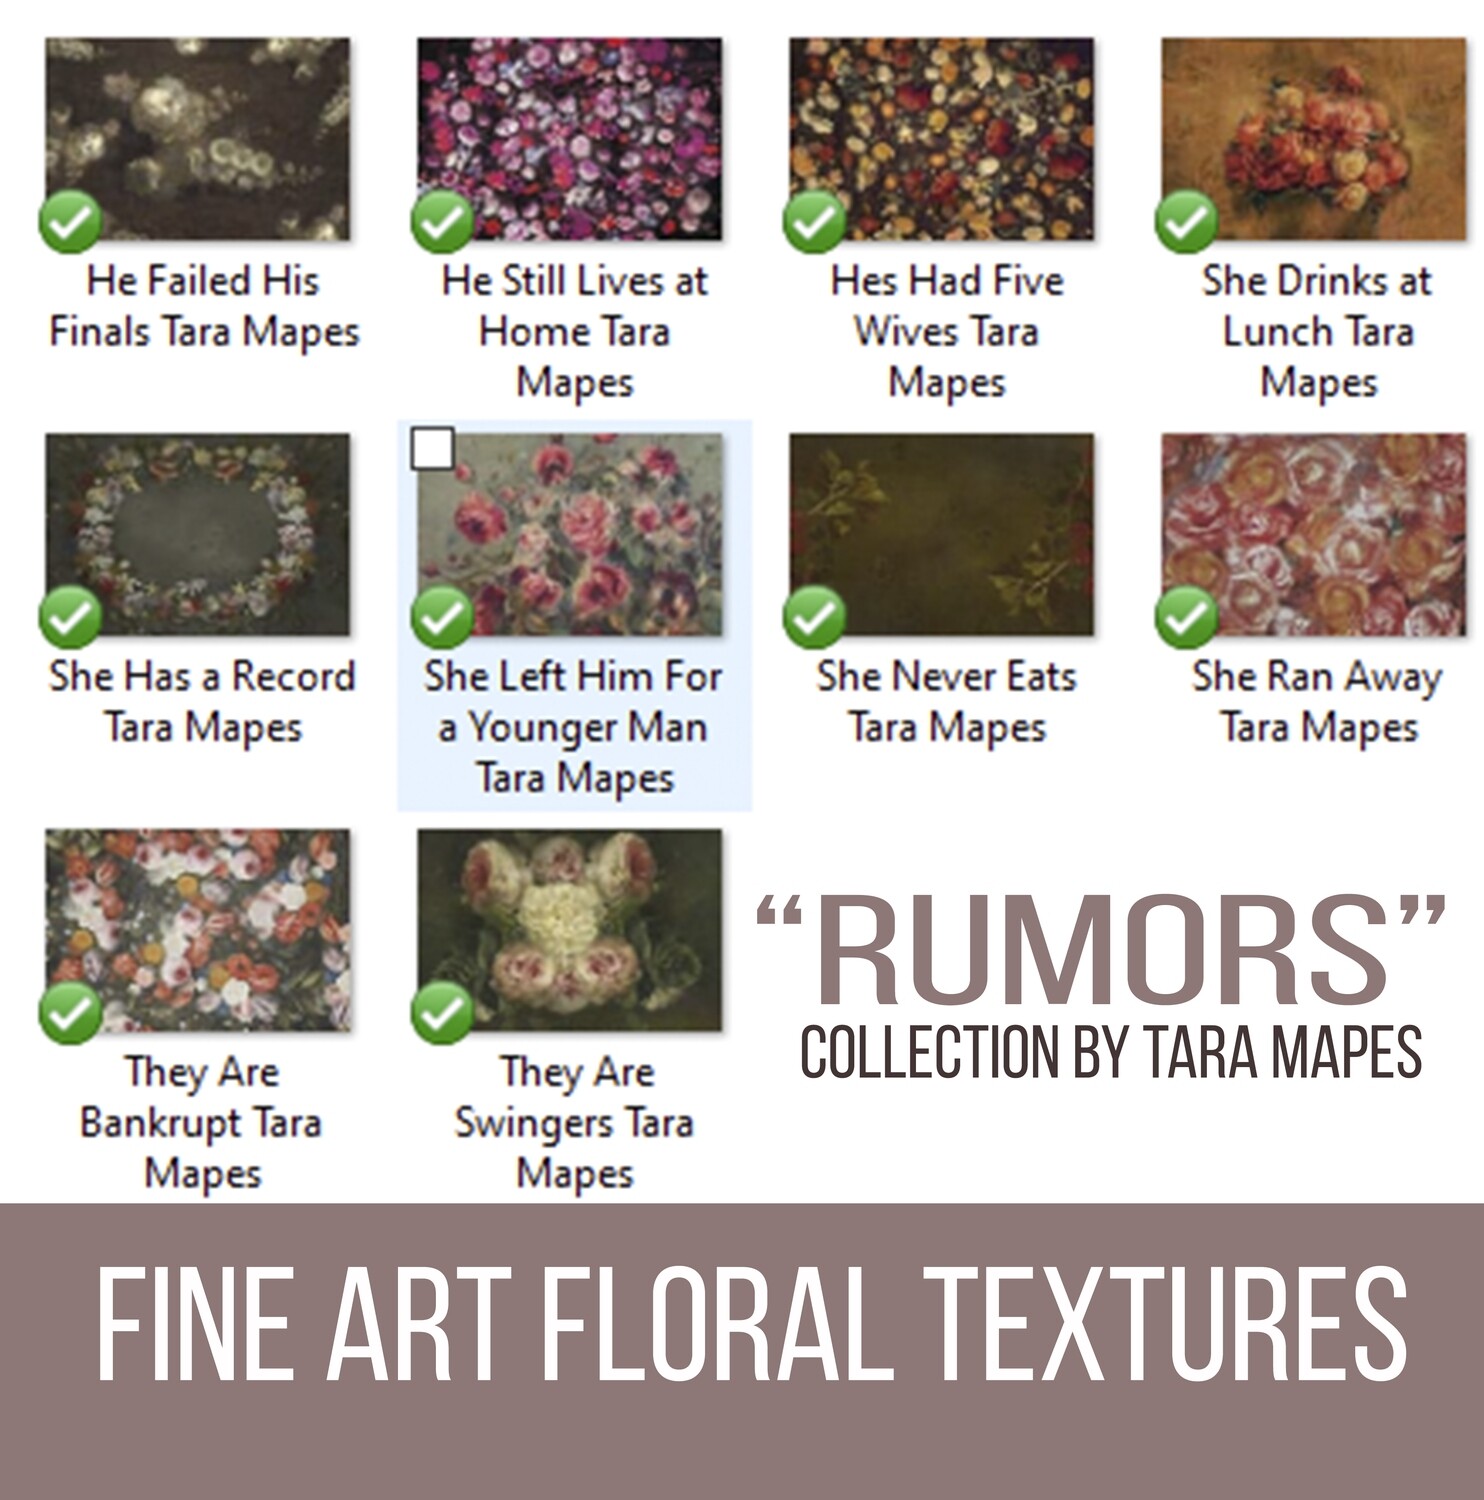 10 Old Masters Floral Textures -Floral Backdrops - Digital Backgrounds - RUMORS Photoshop Overlays by Tara Mapes